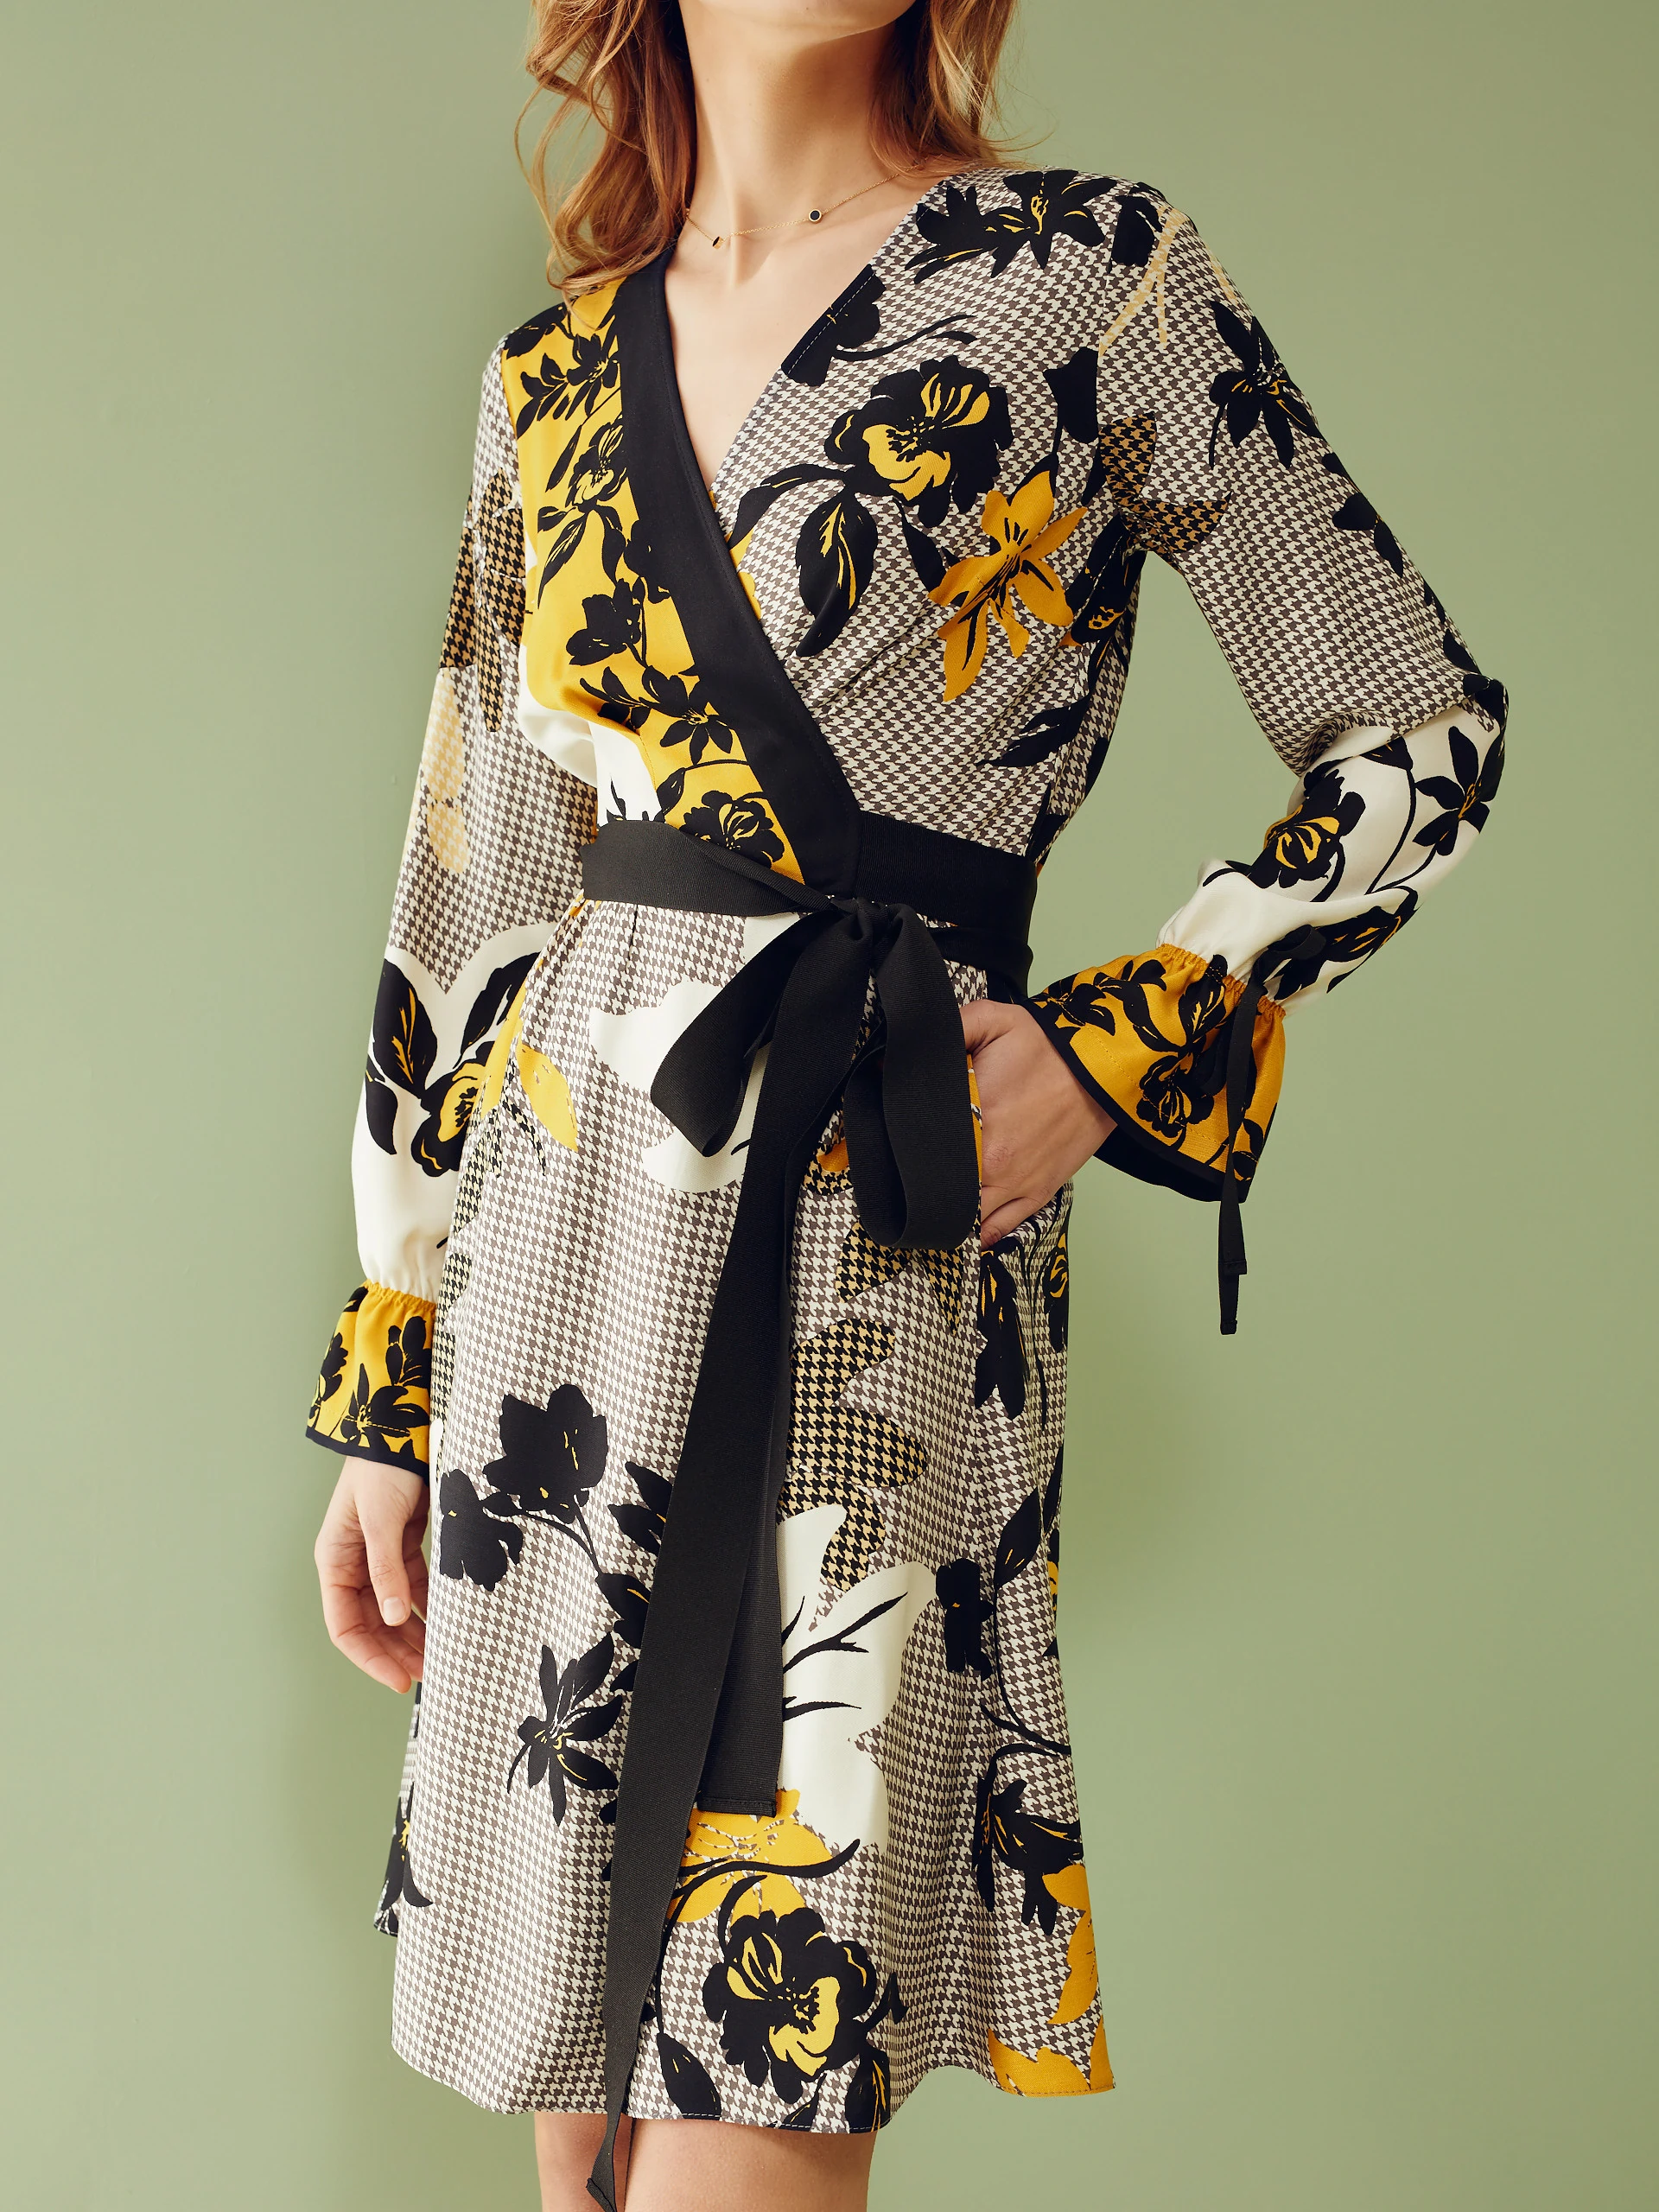 ENVELOPE DRESS WITH FLORAL PATTERN